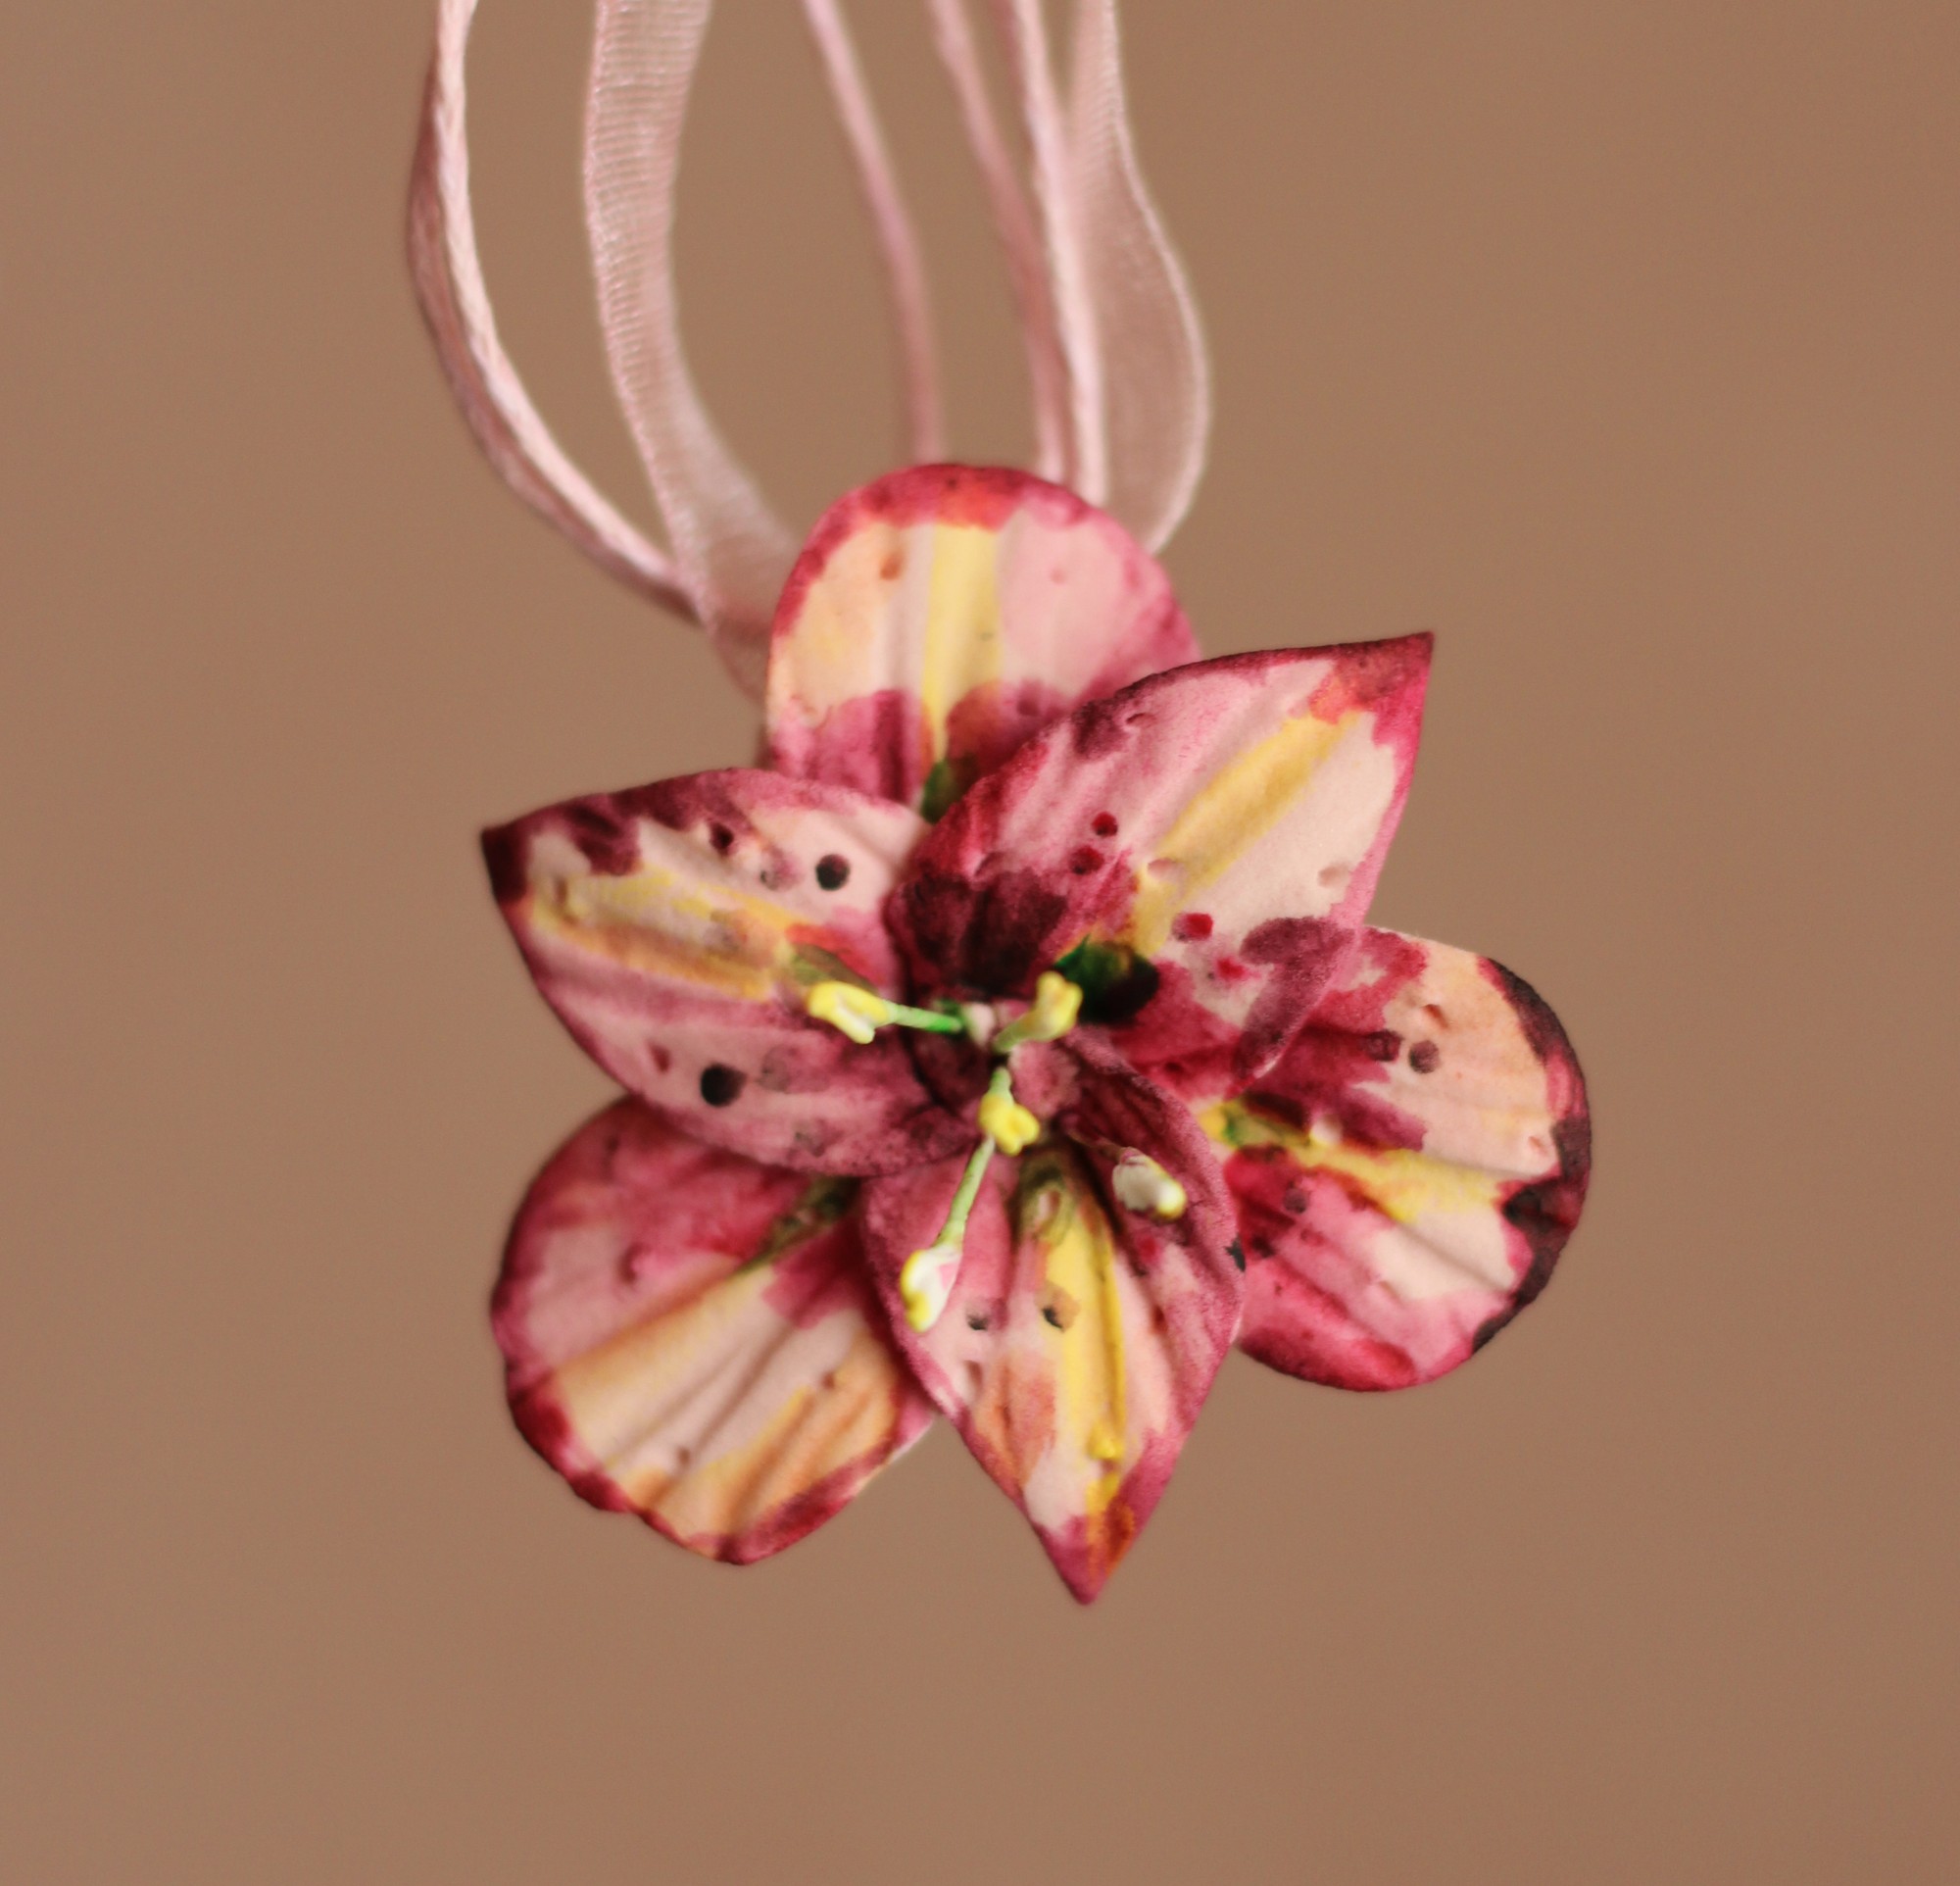 Lily pendant - 32763 from FlorAnna-handmade jewelry with donate to u24